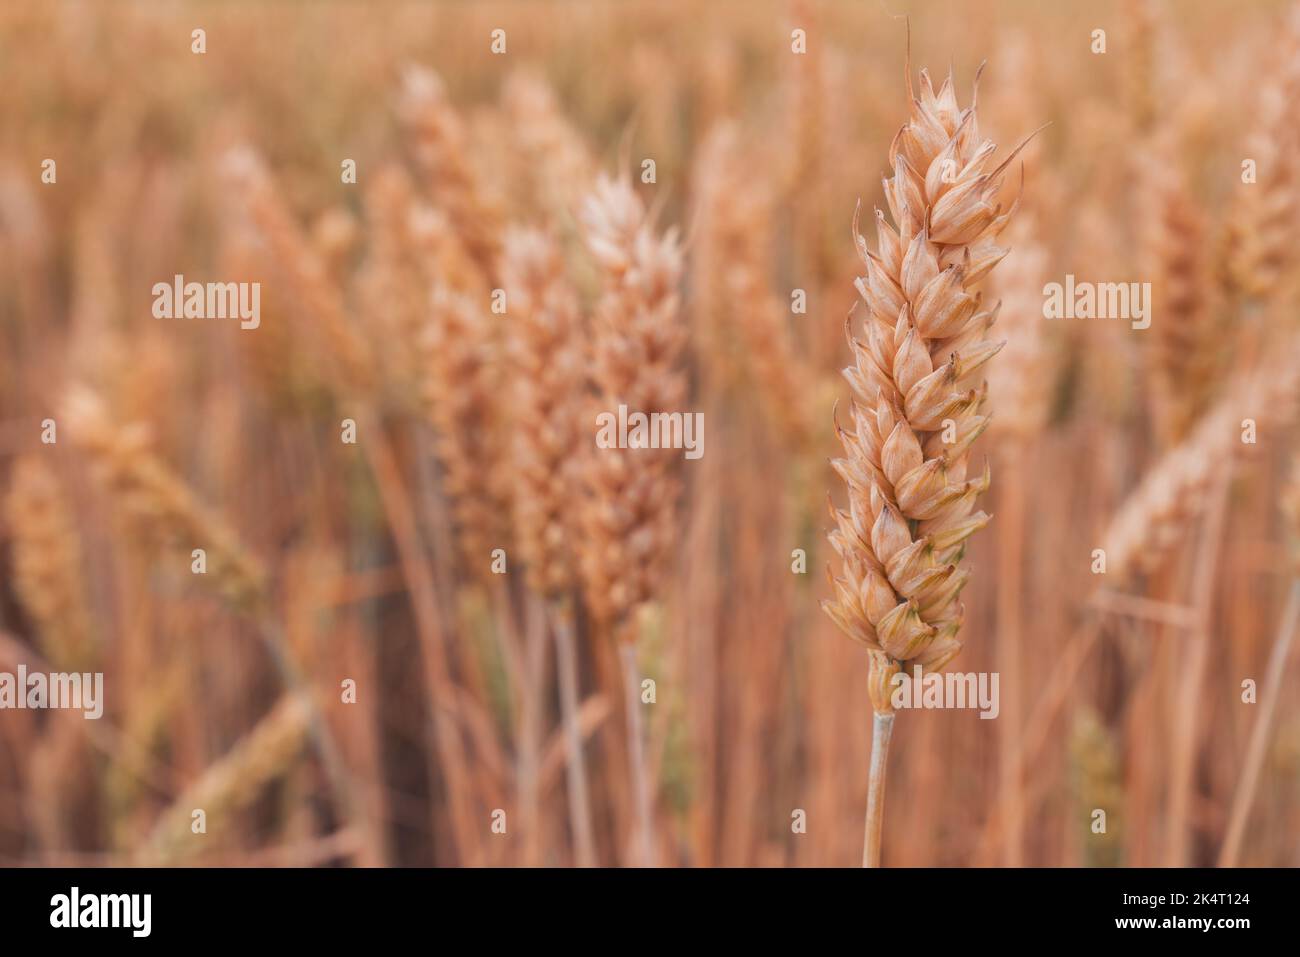 Ripe ear of wheat crop in cultivated agricultural field ready for harvest, selective focus Stock Photo